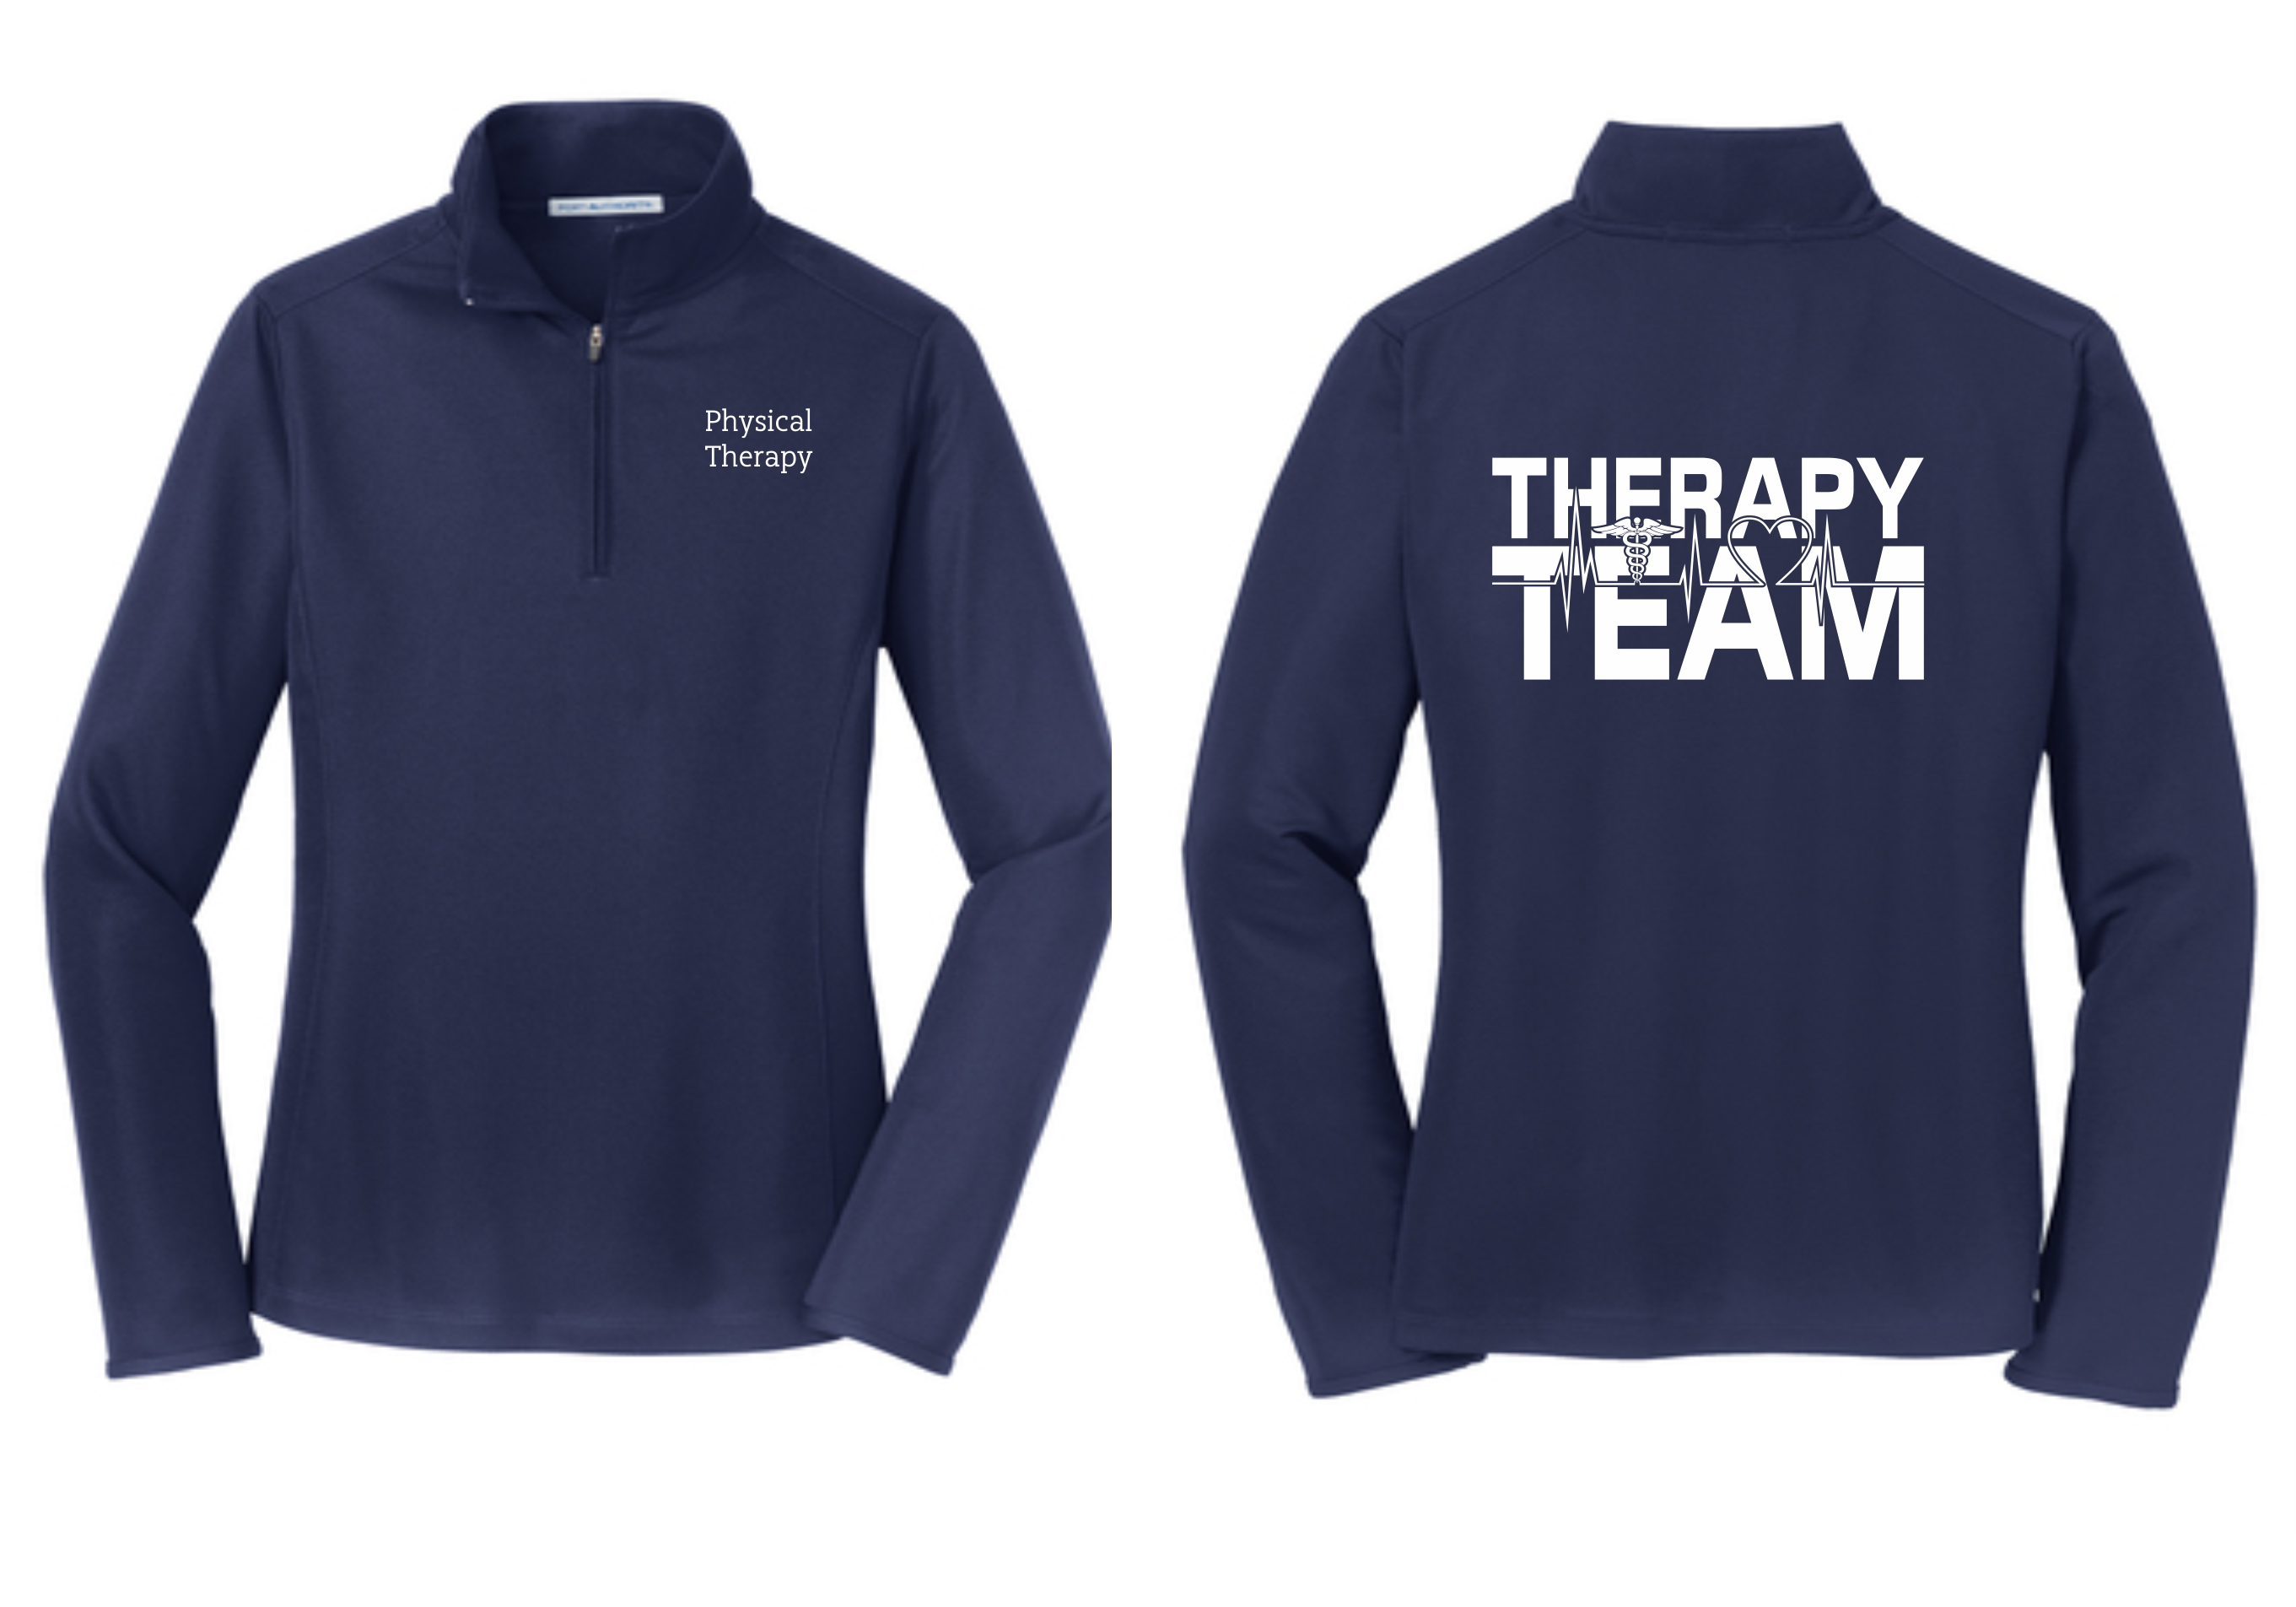 PHW - Physical Therapy Team - Pinpoint Mesh 1/2 Zip